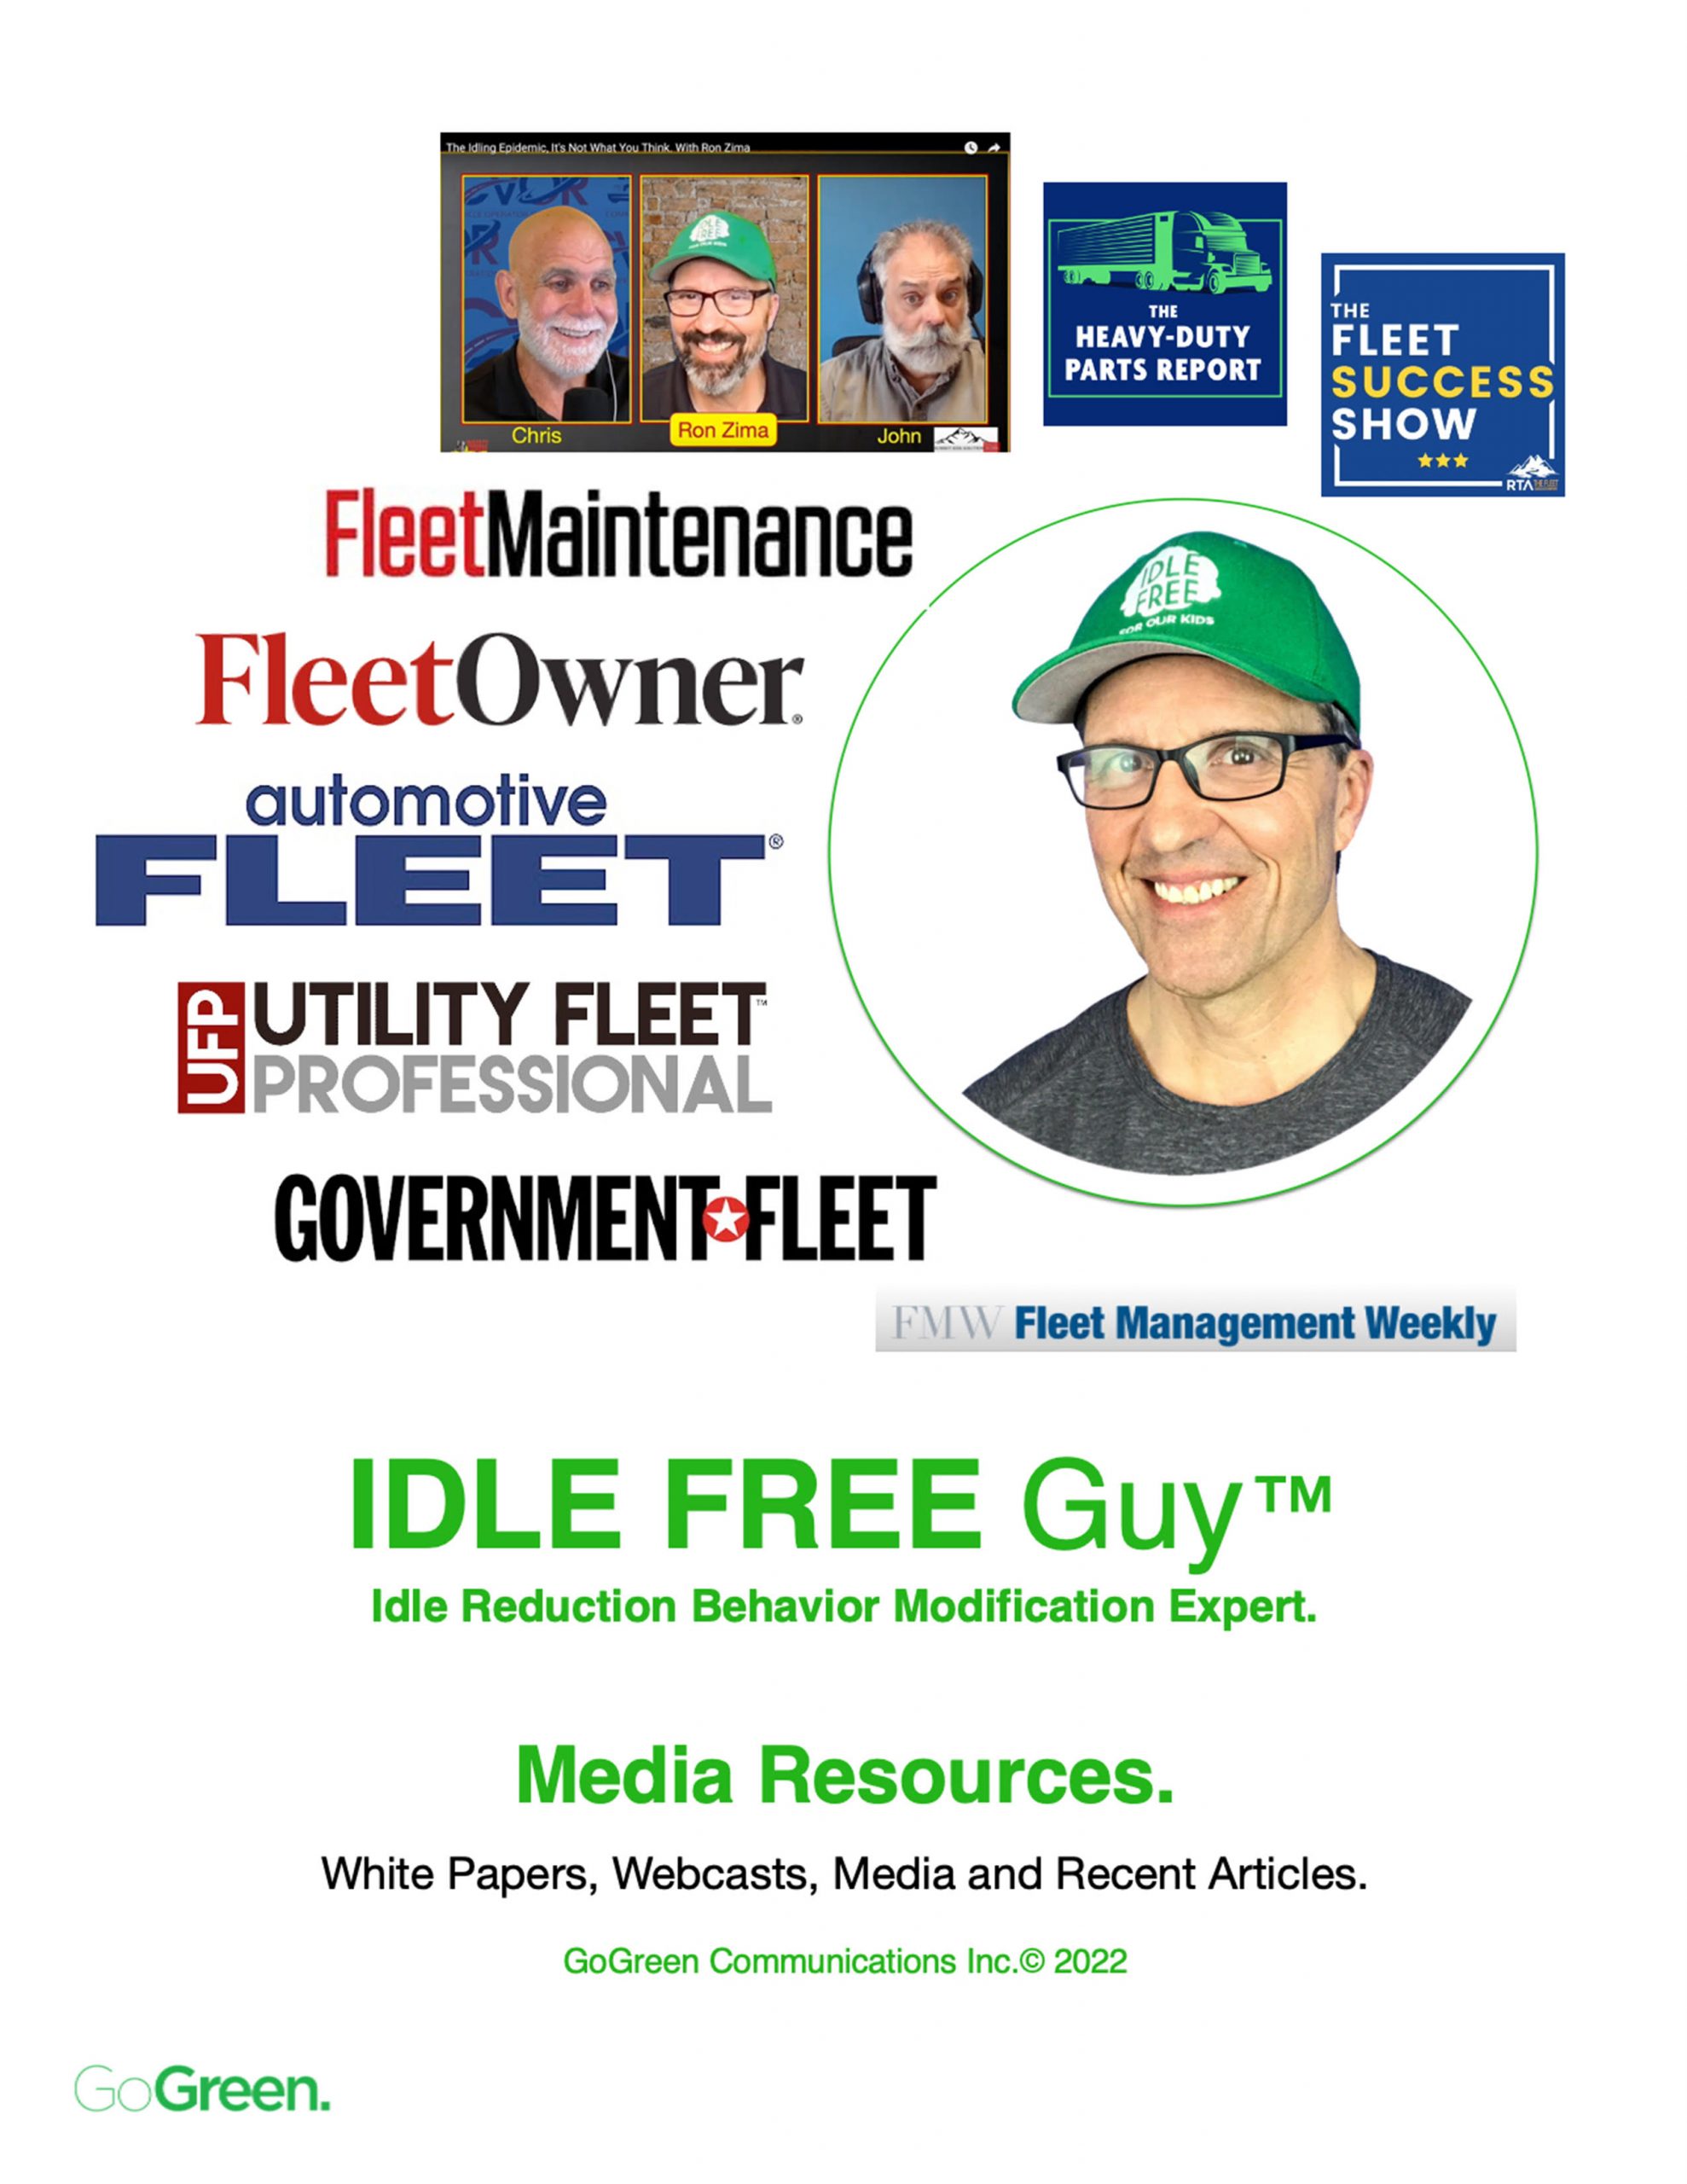 Go Idle Free guy, idle reduction, idle free training, vehicle exhaust, emissions, tailpipe, carbon, climate change, climate, gogreen, fleet, fleets, fuel, ELD, elearning, fuel, fuel savings, bus, analytics, transportation, cost reduction,